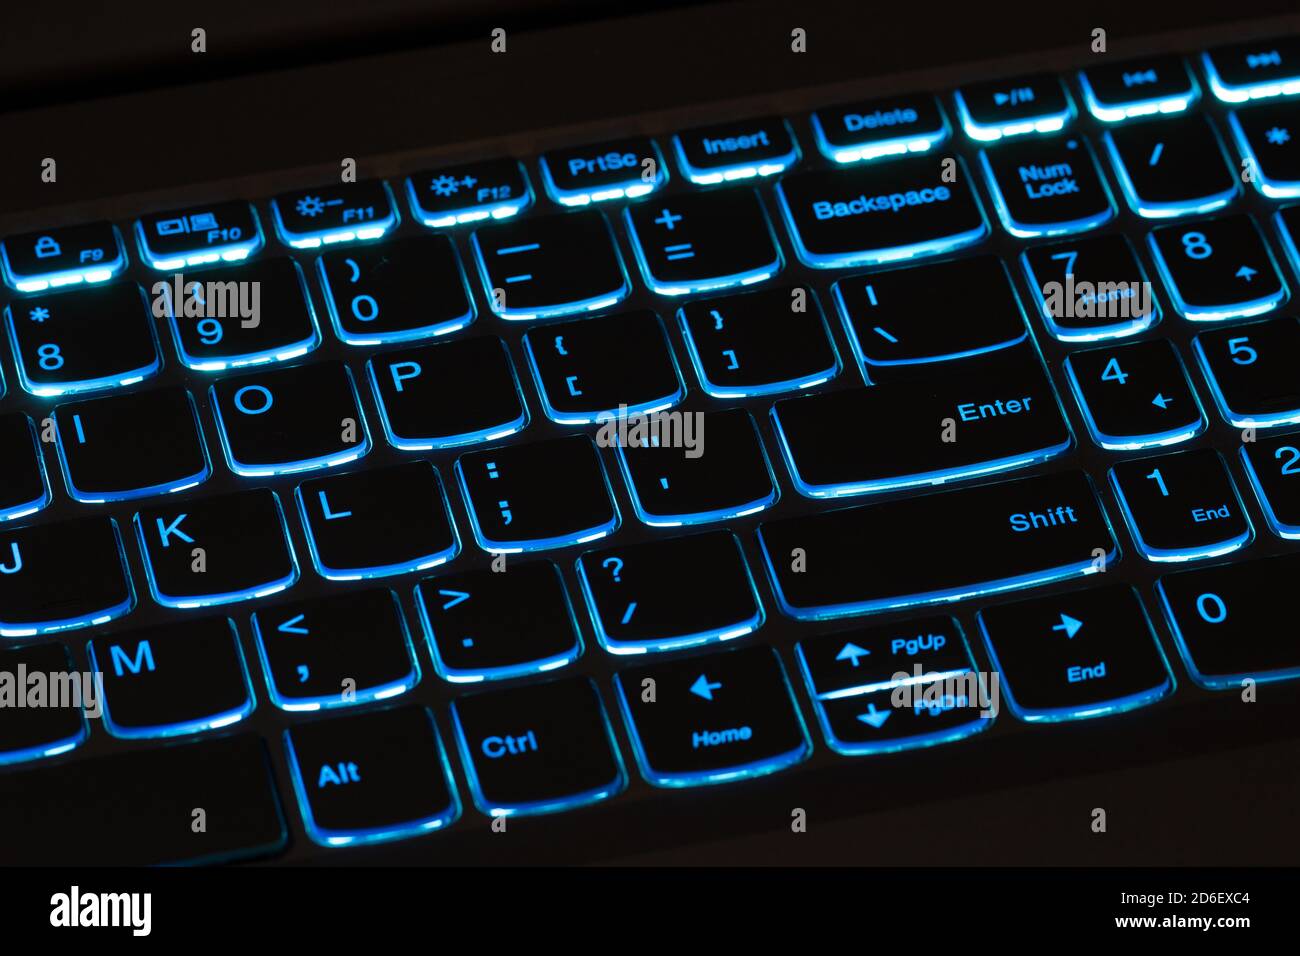 Computer keyboard glows red with a blue illuminated euro symbol. News Photo  - Getty Images